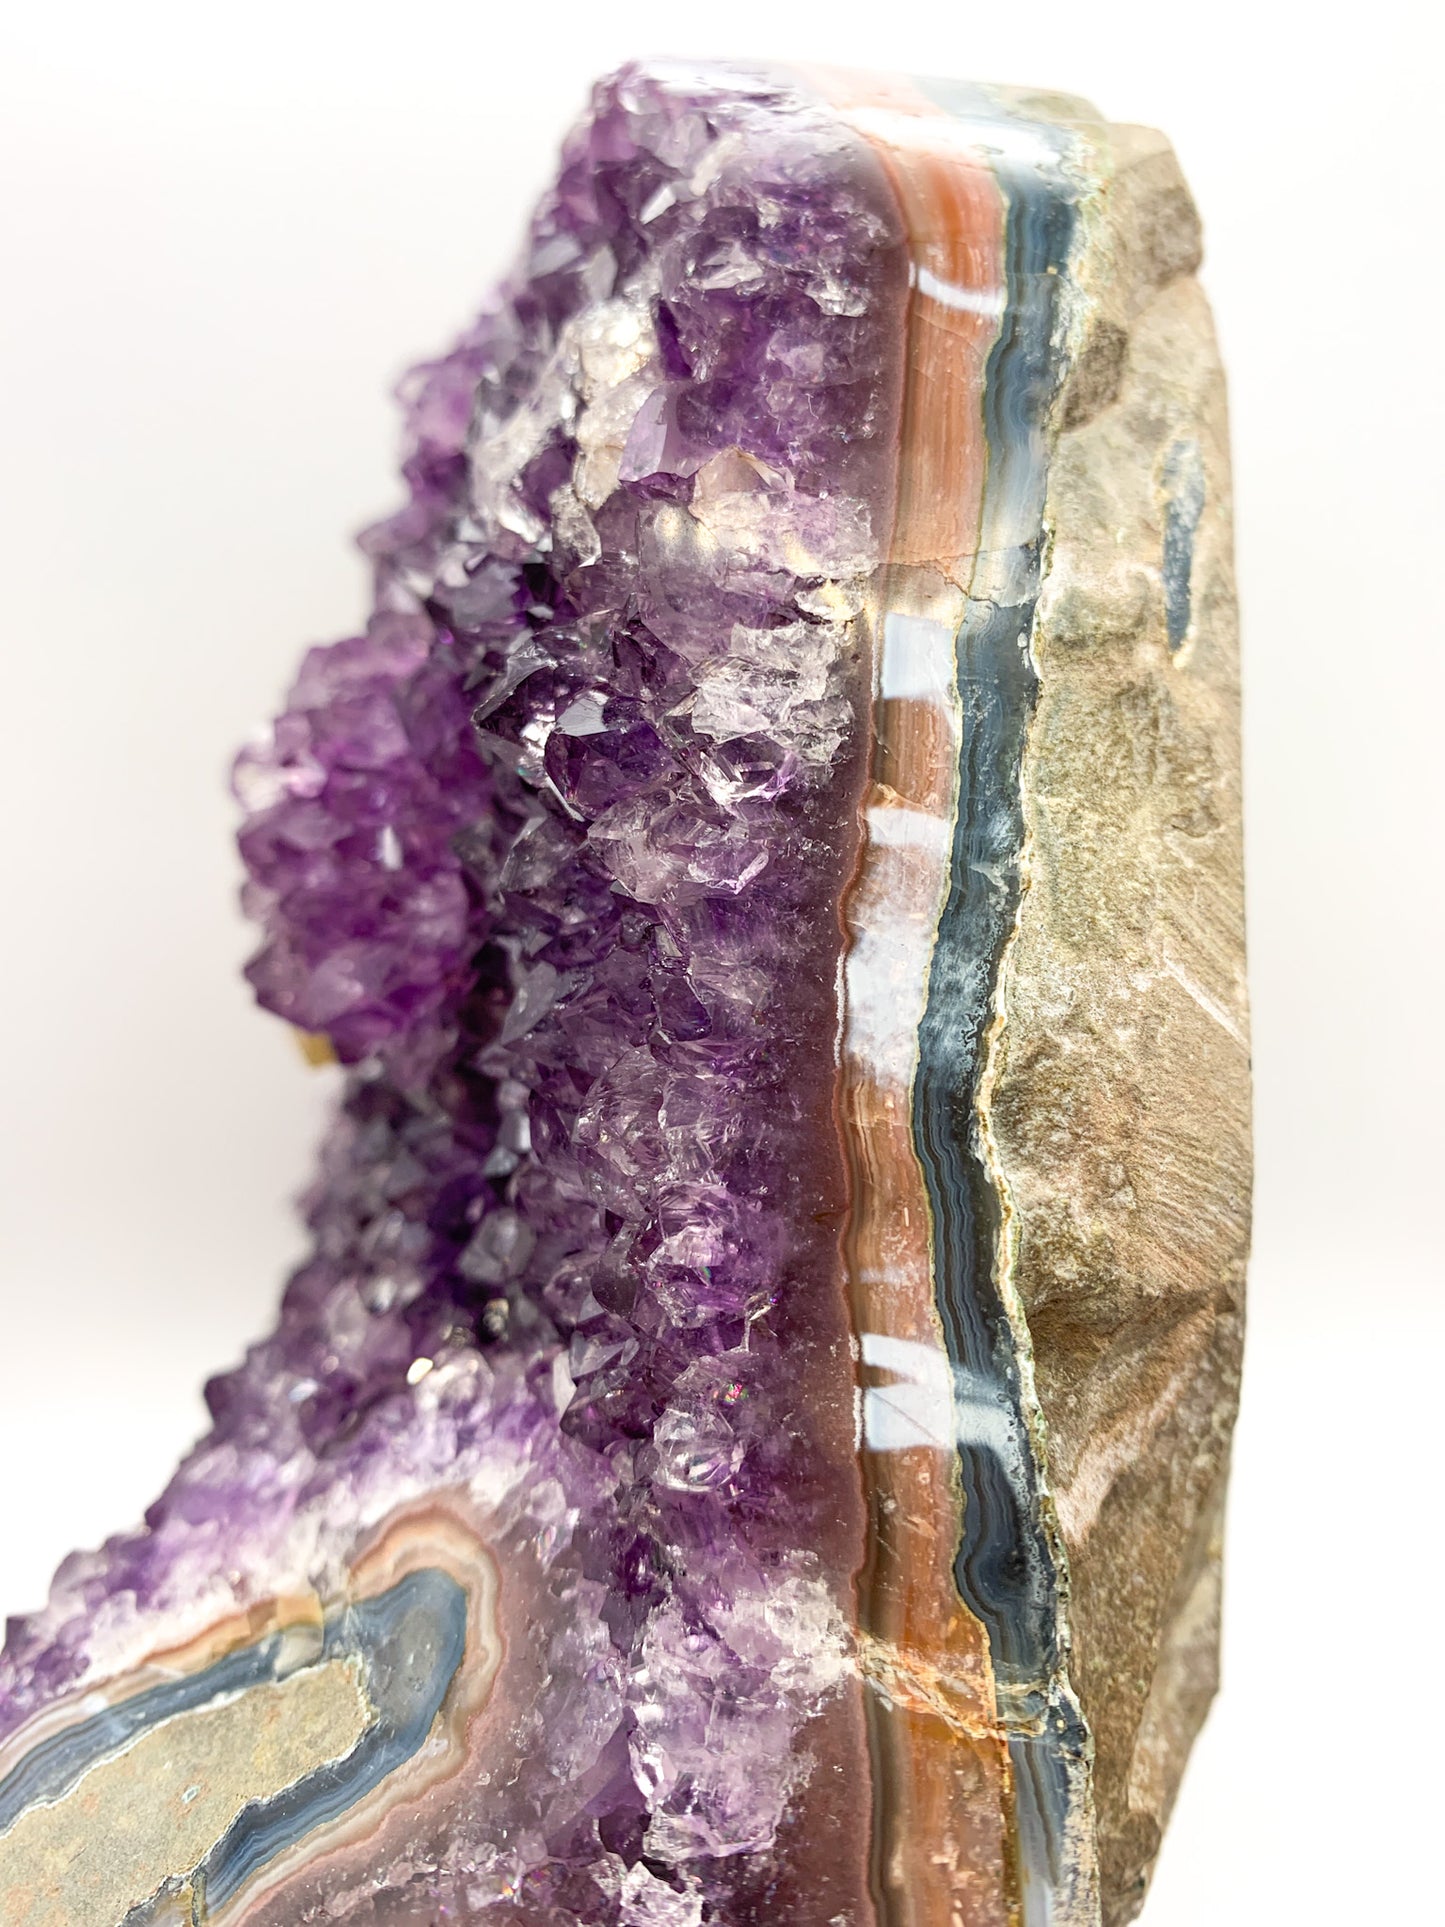 Amethyst Raw Cut Base with Calcite Inclusion - Crystal Love Treasures